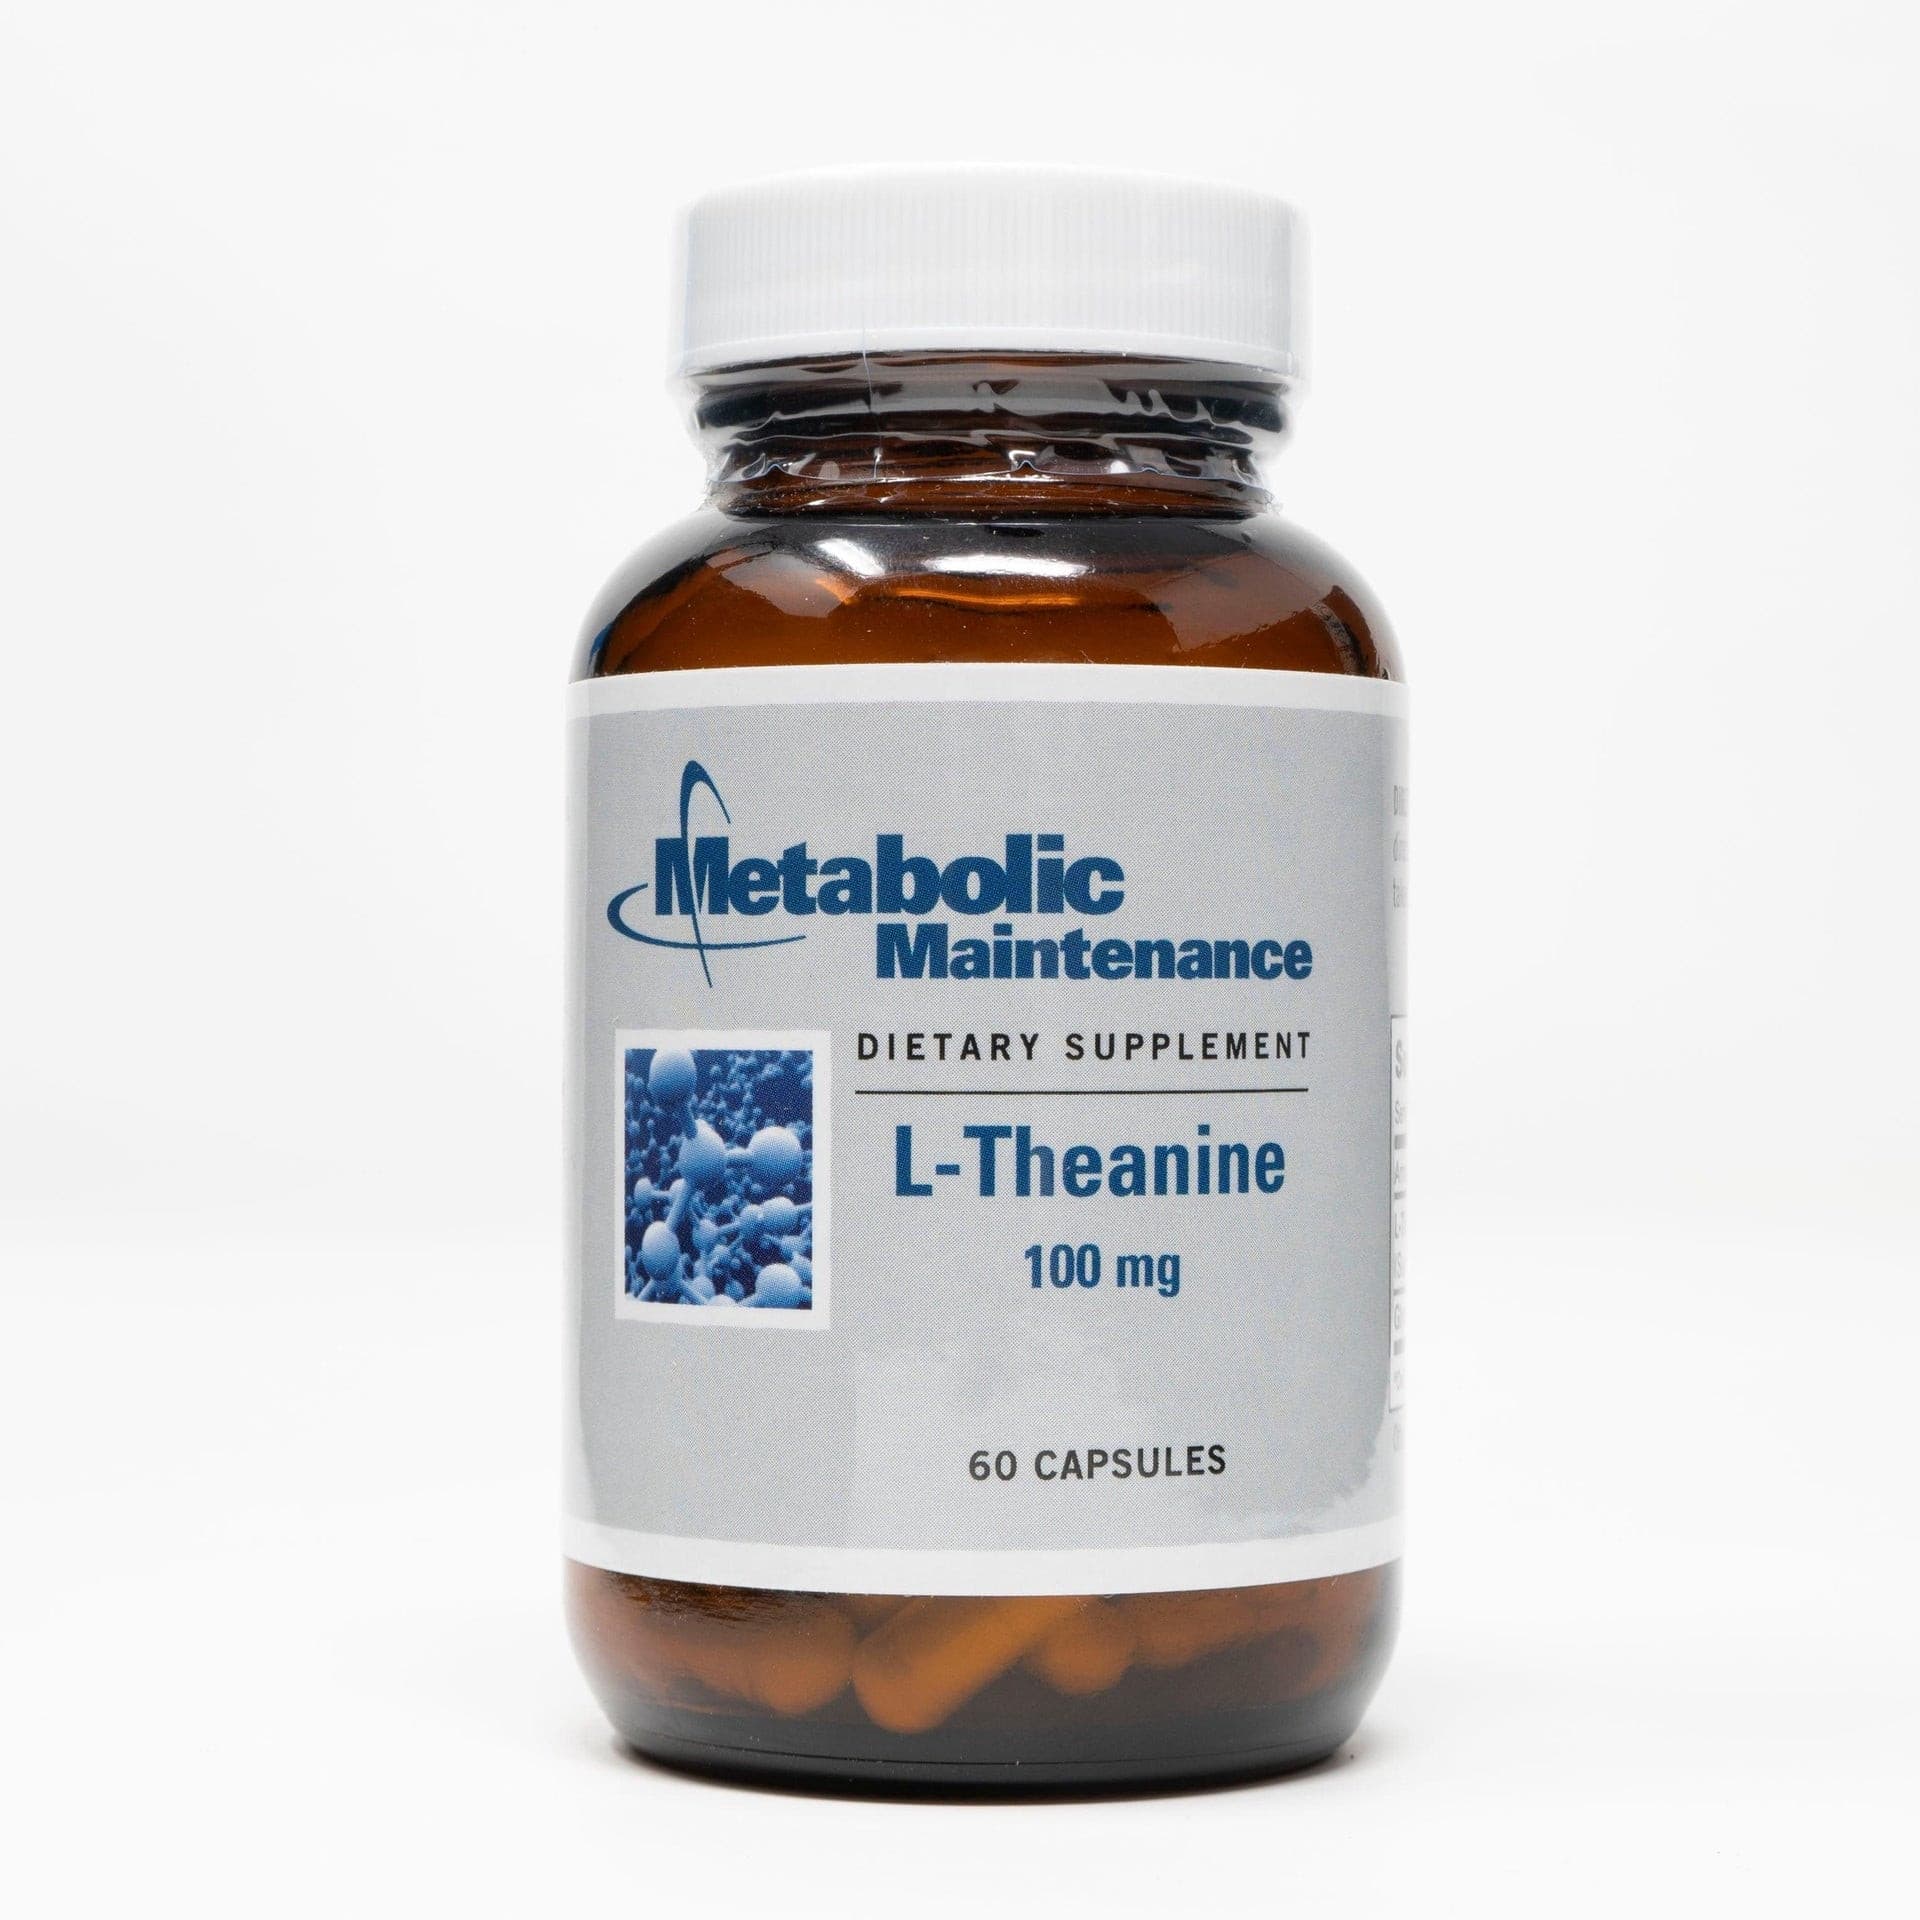 L-Theanine 100mg 60 Capsules.